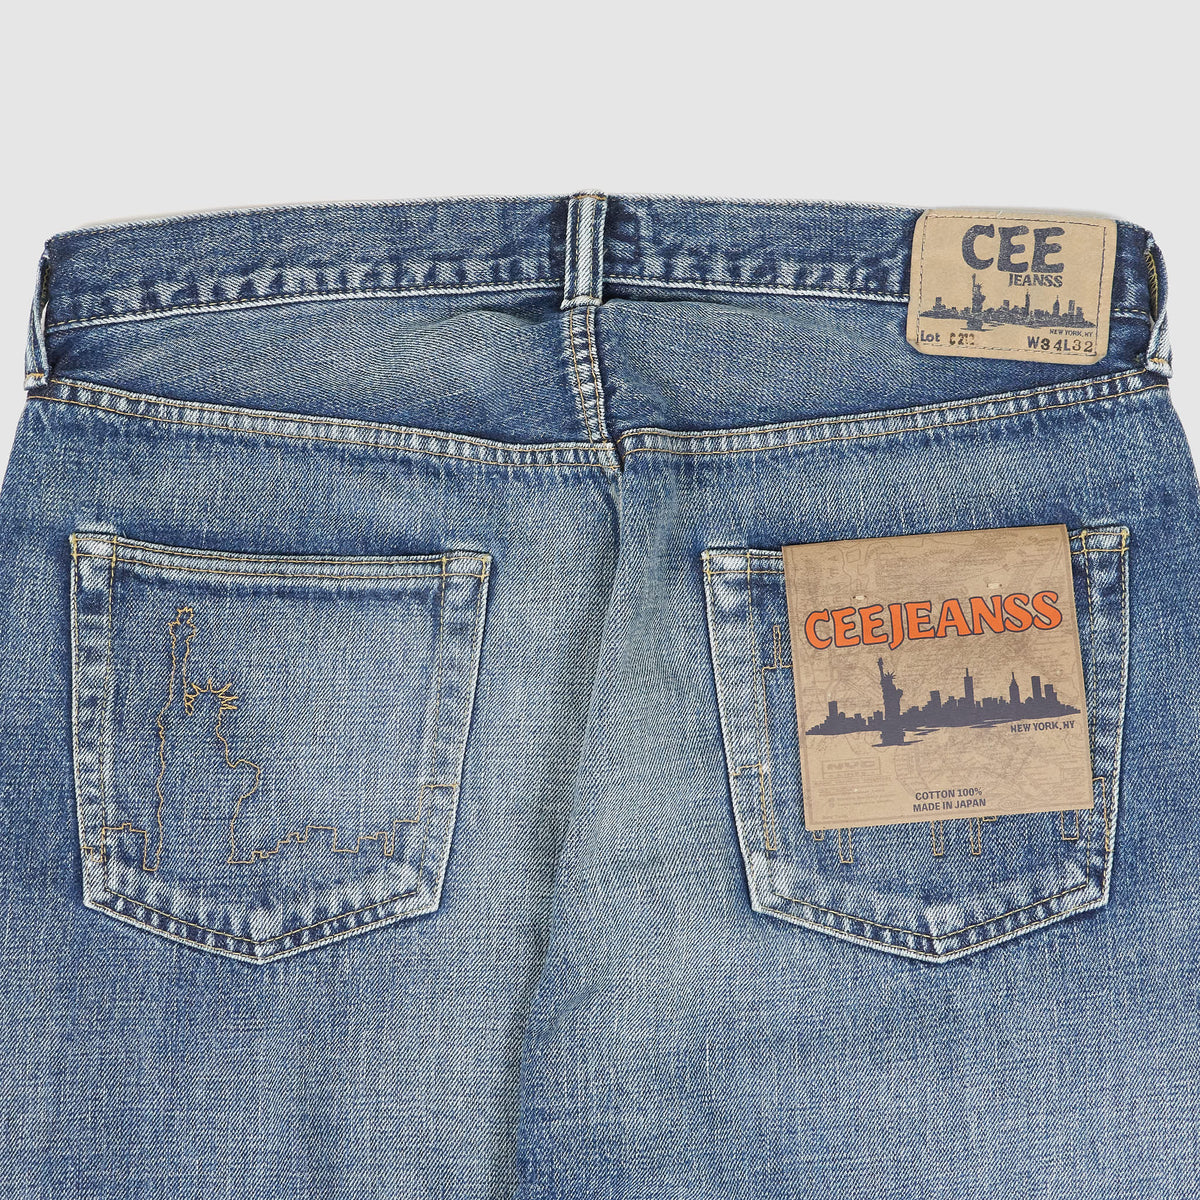 Cee Jeanss &amp; Co. Washed 13,5oz. Selvage Jeans